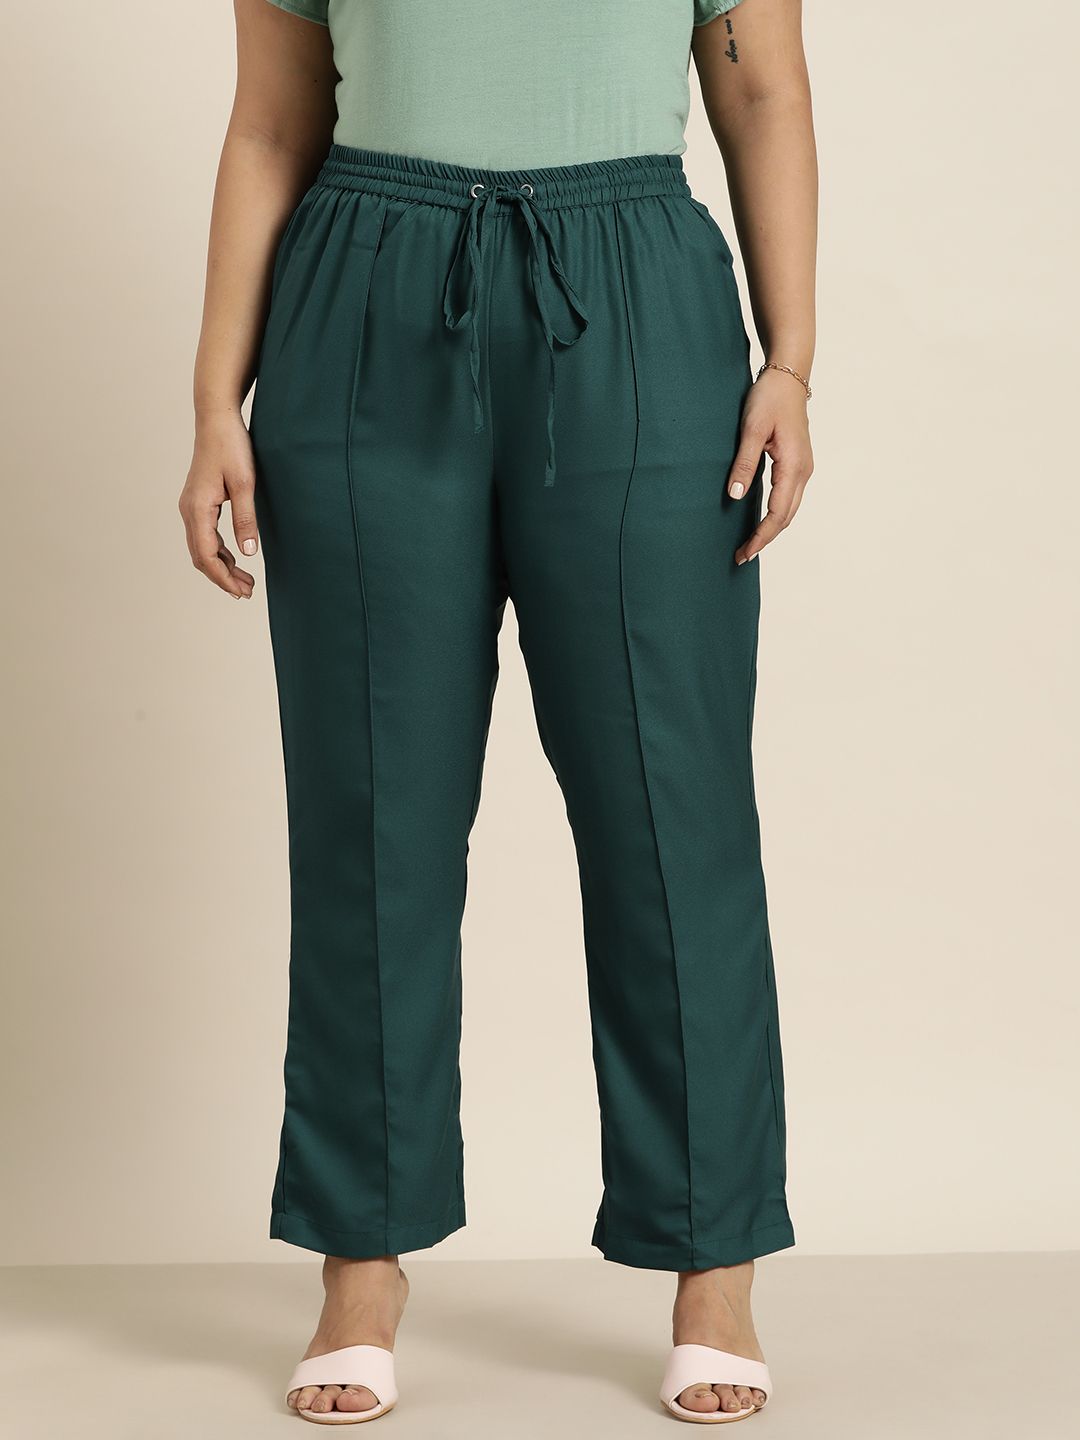 Sztori Women Plus Size Solid Regular Fit Trousers Price in India